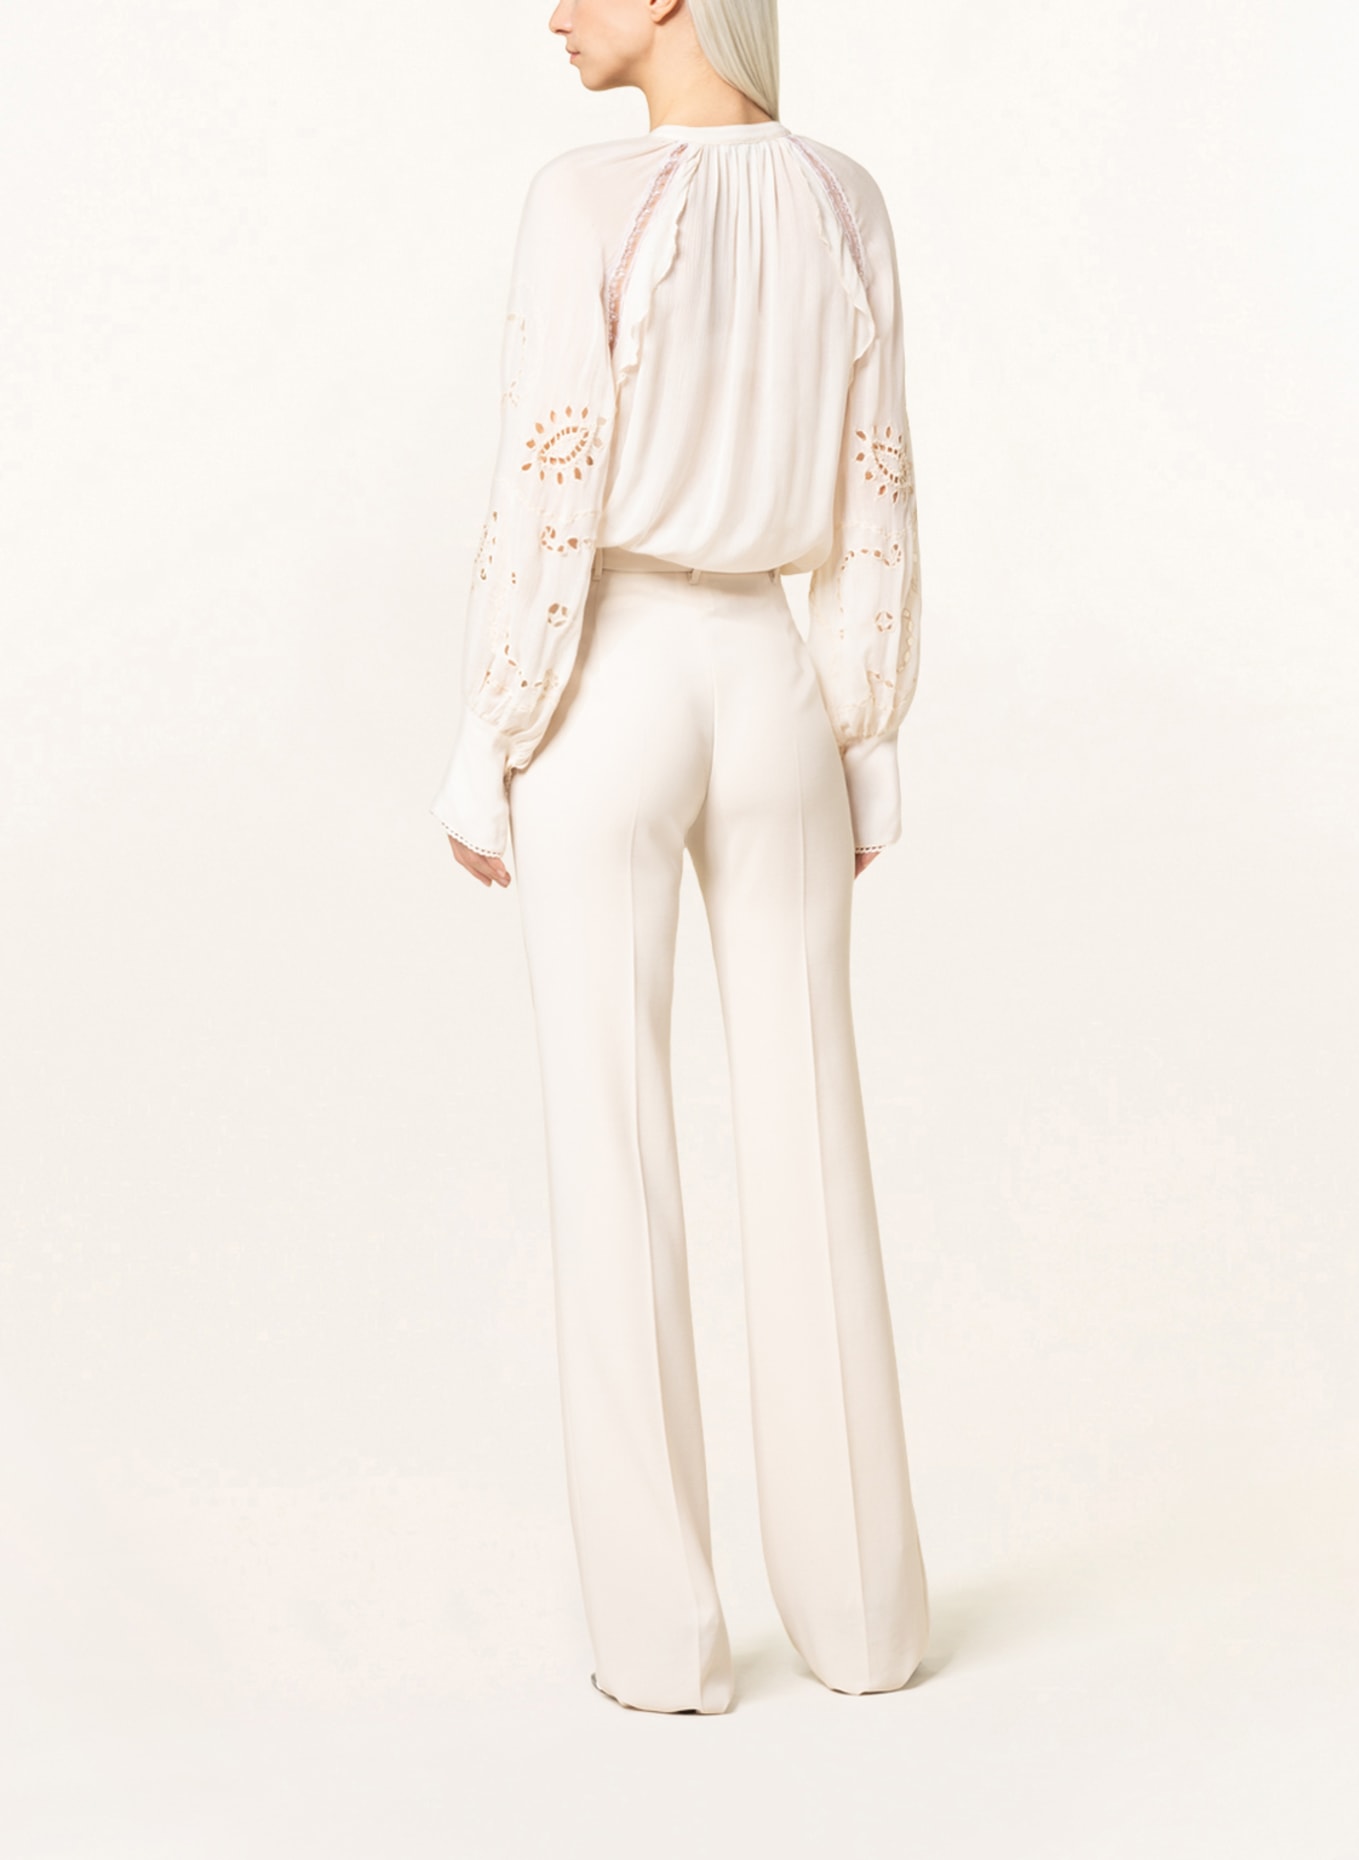 PATRIZIA PEPE Shirt blouse with ruffles and lace, Color: ECRU (Image 3)